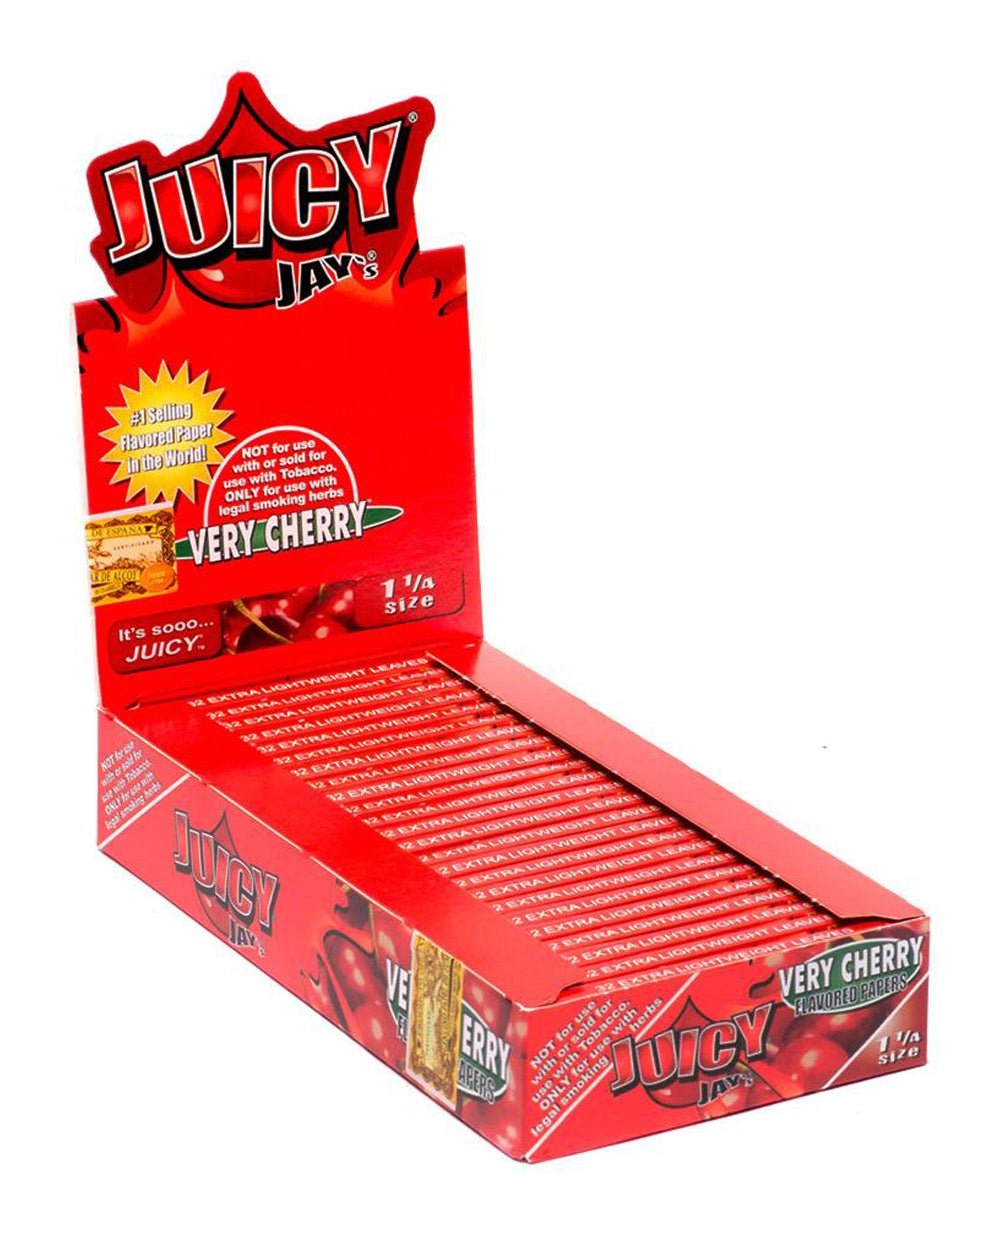 JUICY JAY'S | 'Retail Display' 1 1/4 Size Hemp Rolling Papers | 76mm - Very Cherry - 24 Count - 1